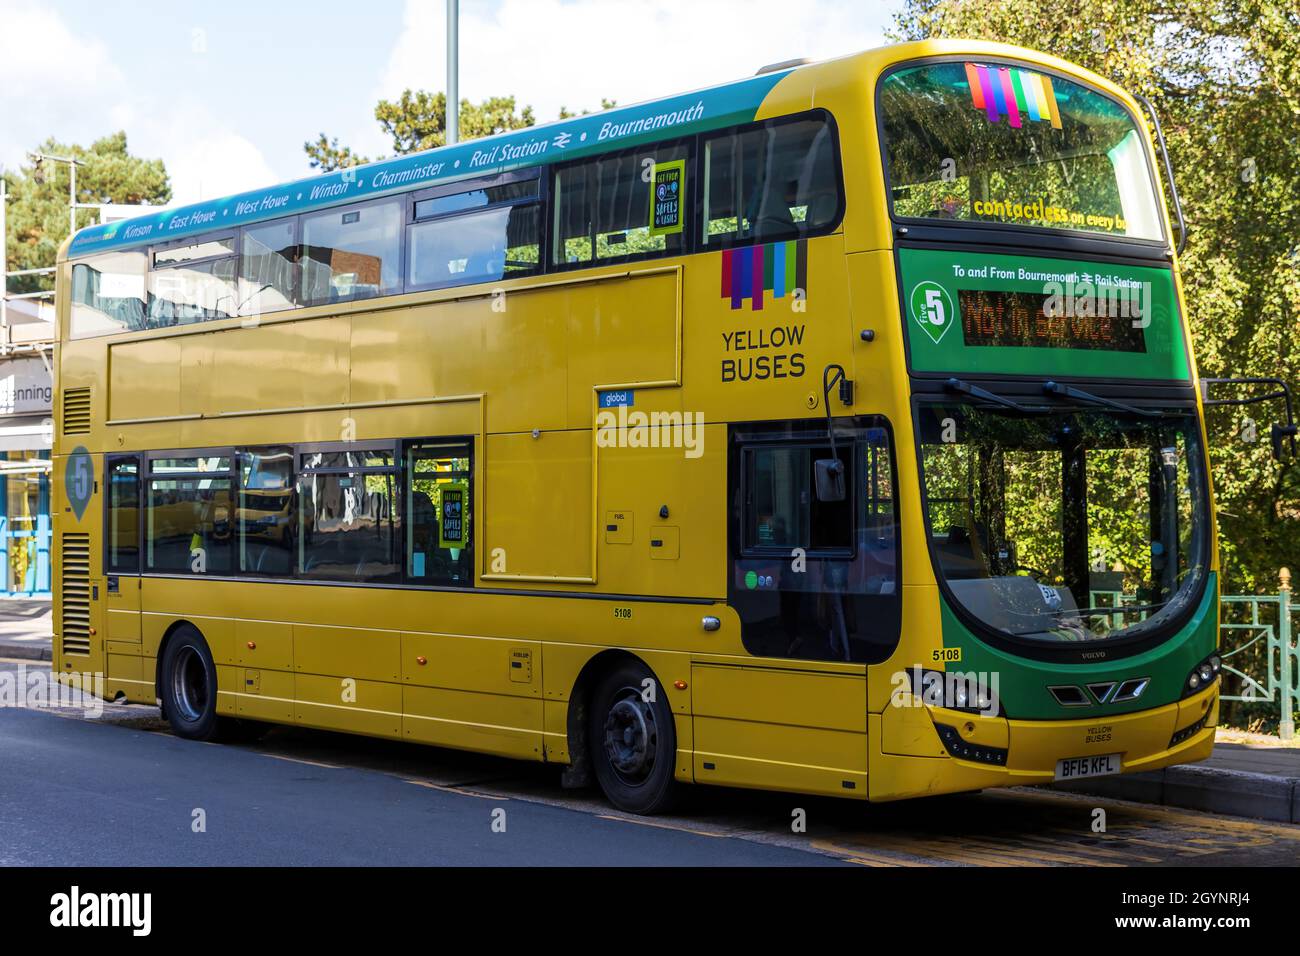 A 2015 Volvo B5TL, Reg No: BF15 KFL, Double Decker Bus, from the Yellow Buses Company, parked in Gervis Place Bournemouth UK 29-09-2021. Stock Photo